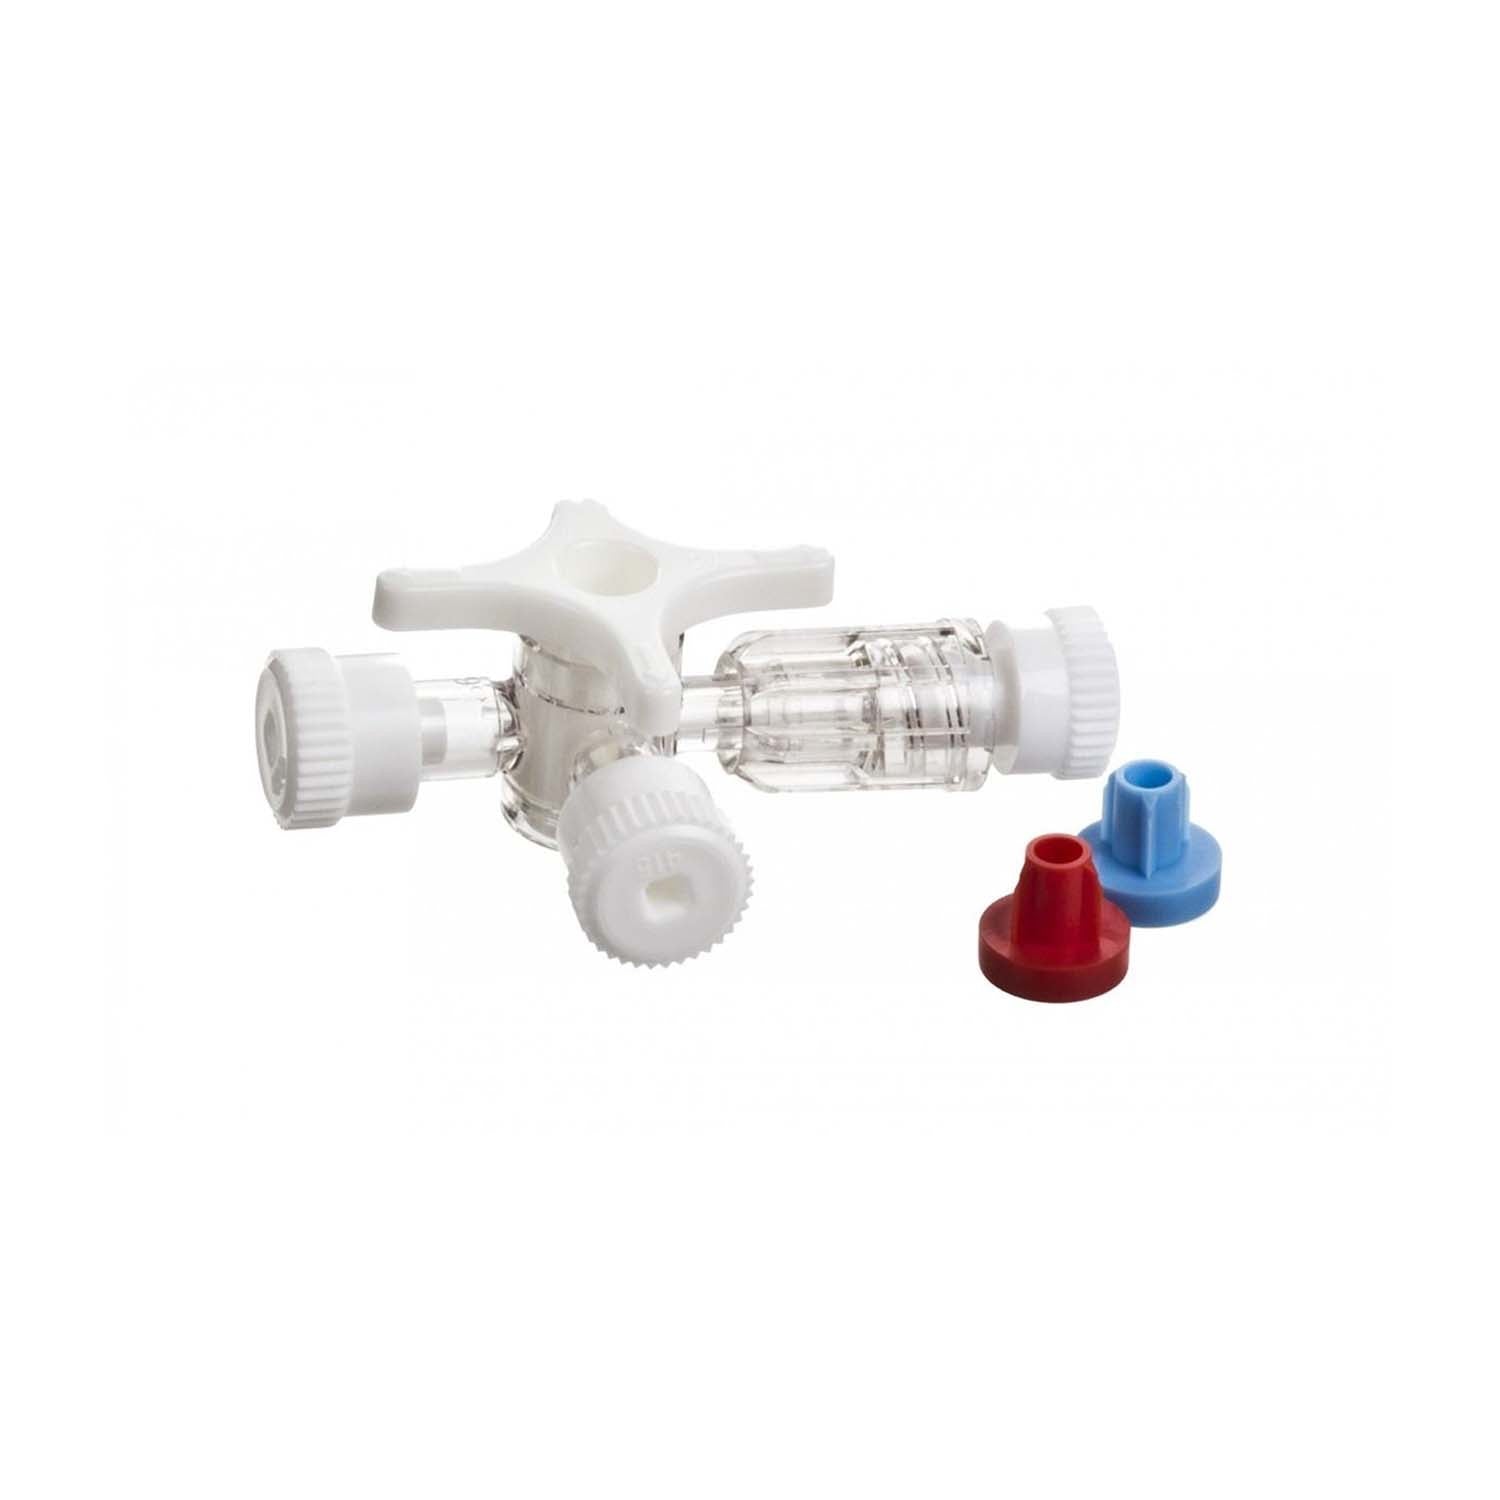 BD 3 Way Stopcock | Rotating Luer Lock | White Tap Colour Coding Pegs | Pack of 100